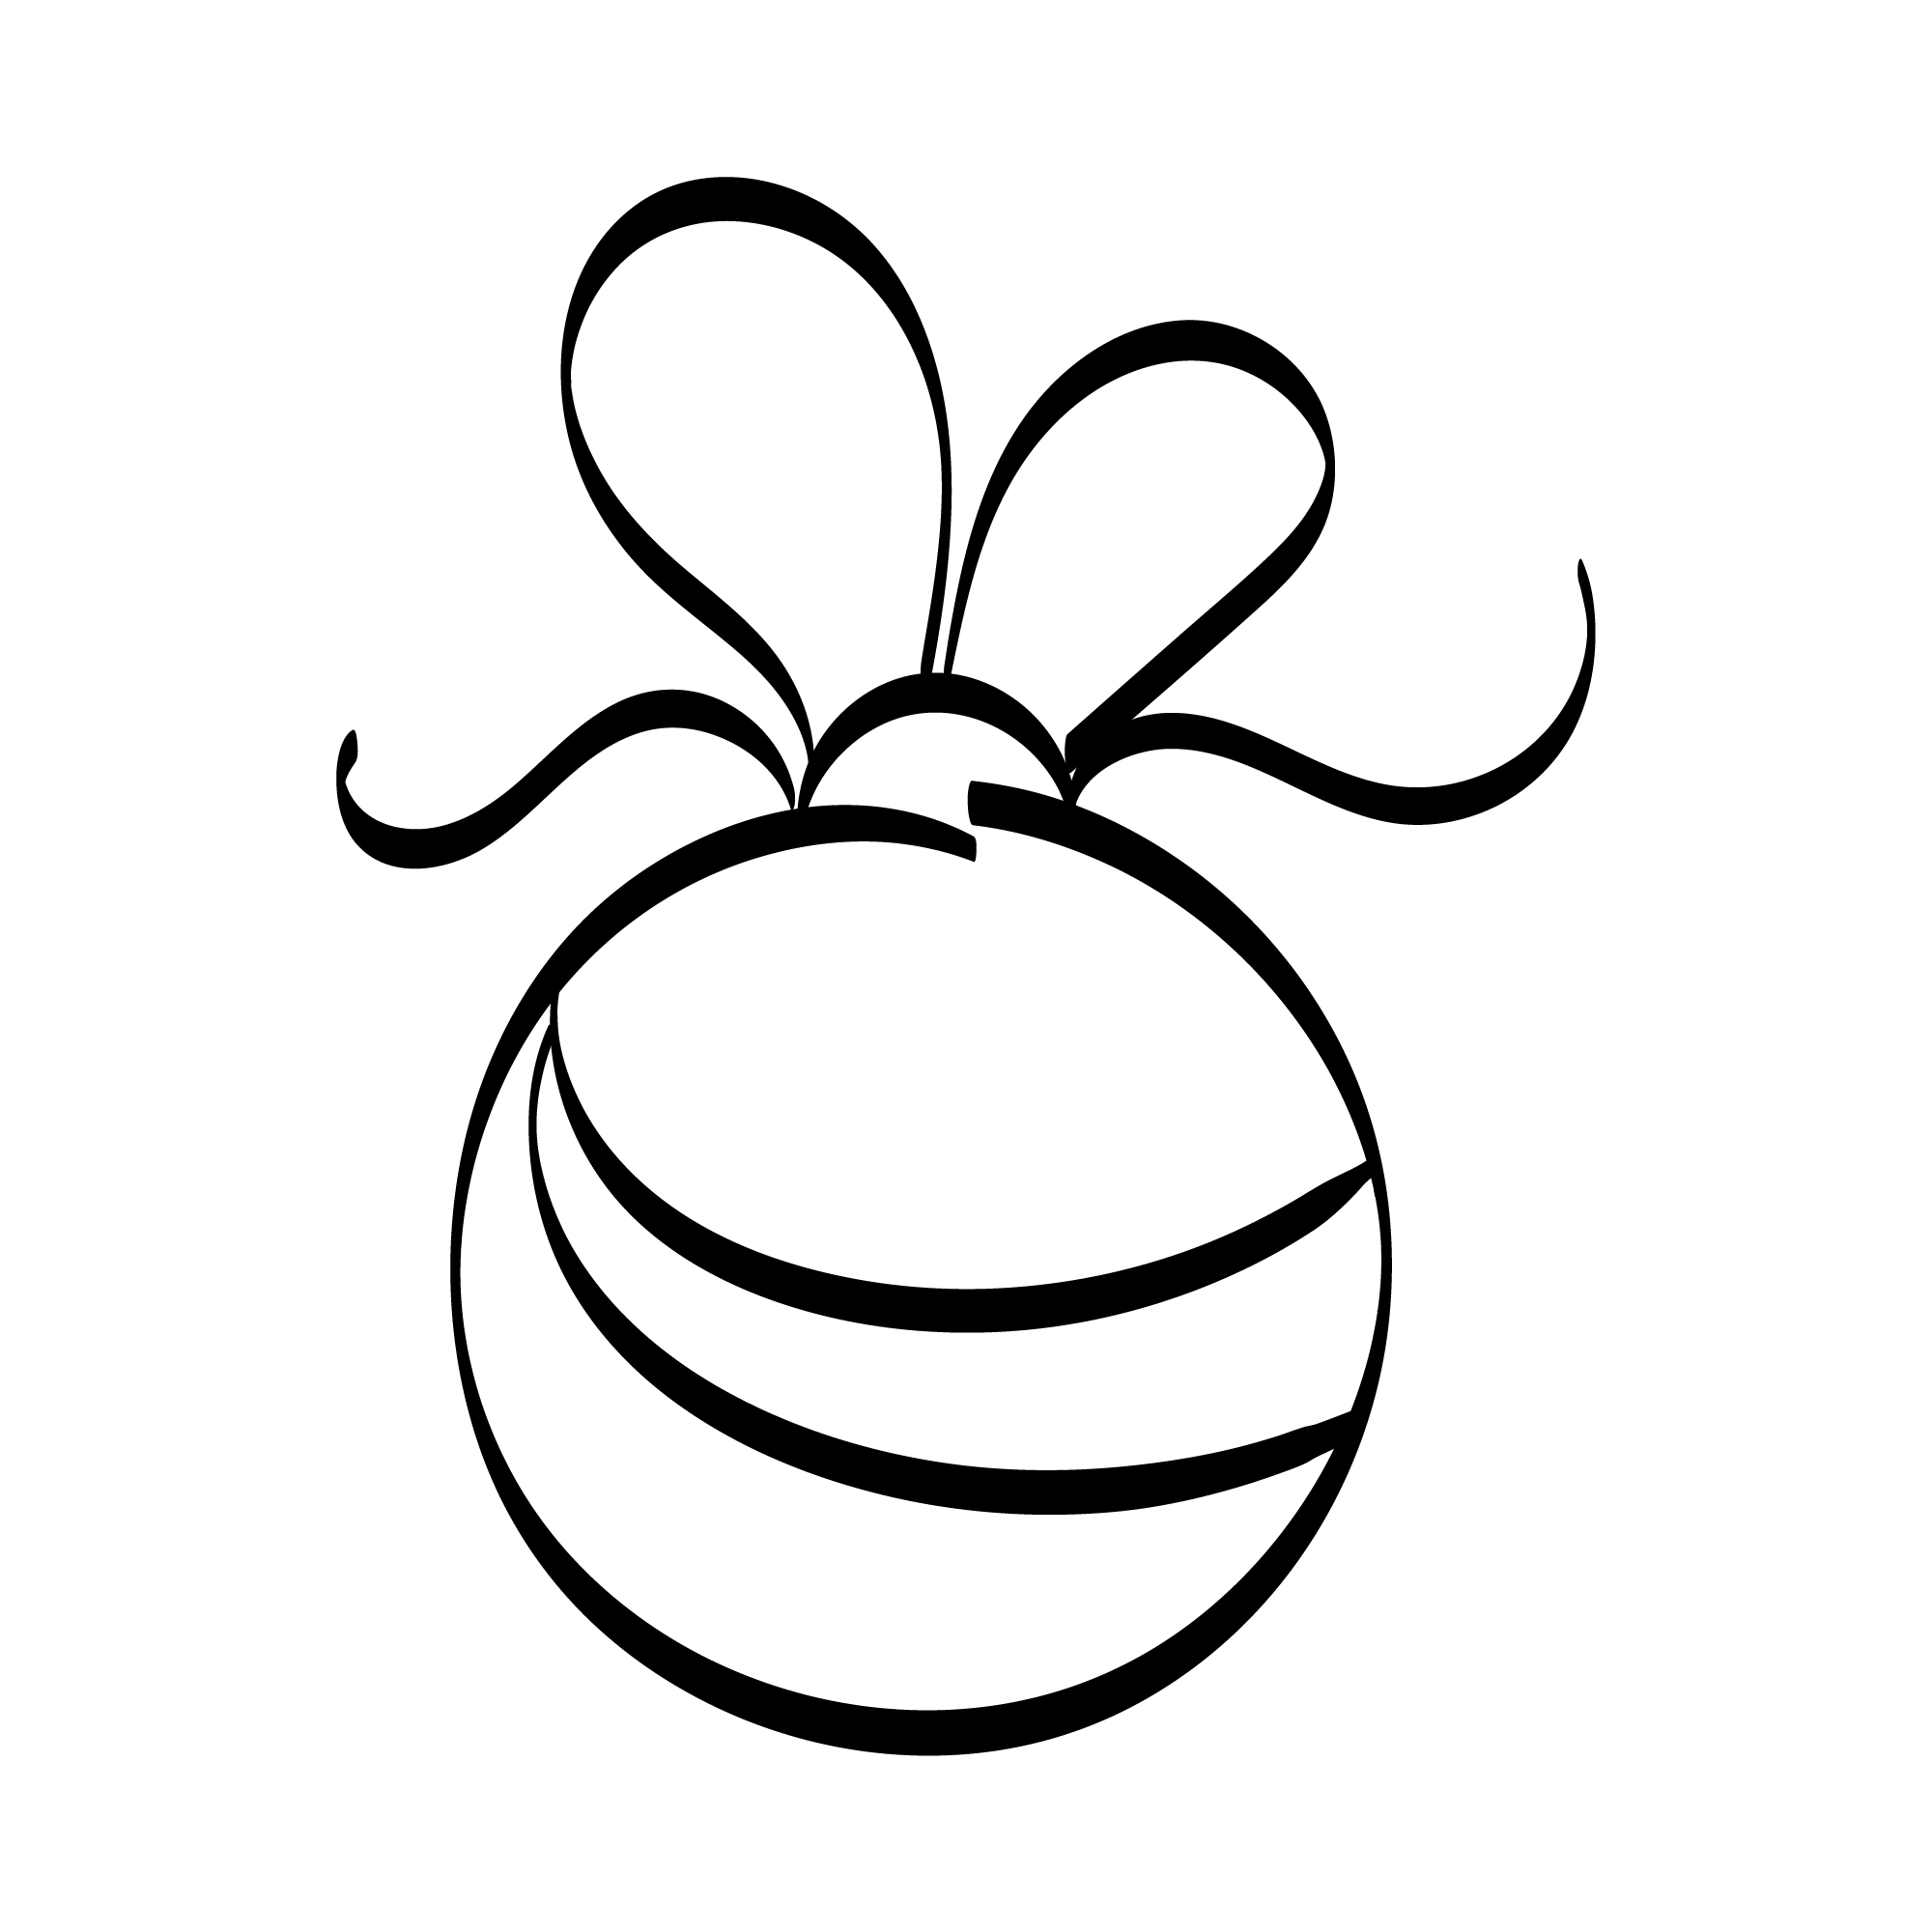 Christmas toy element in line art.